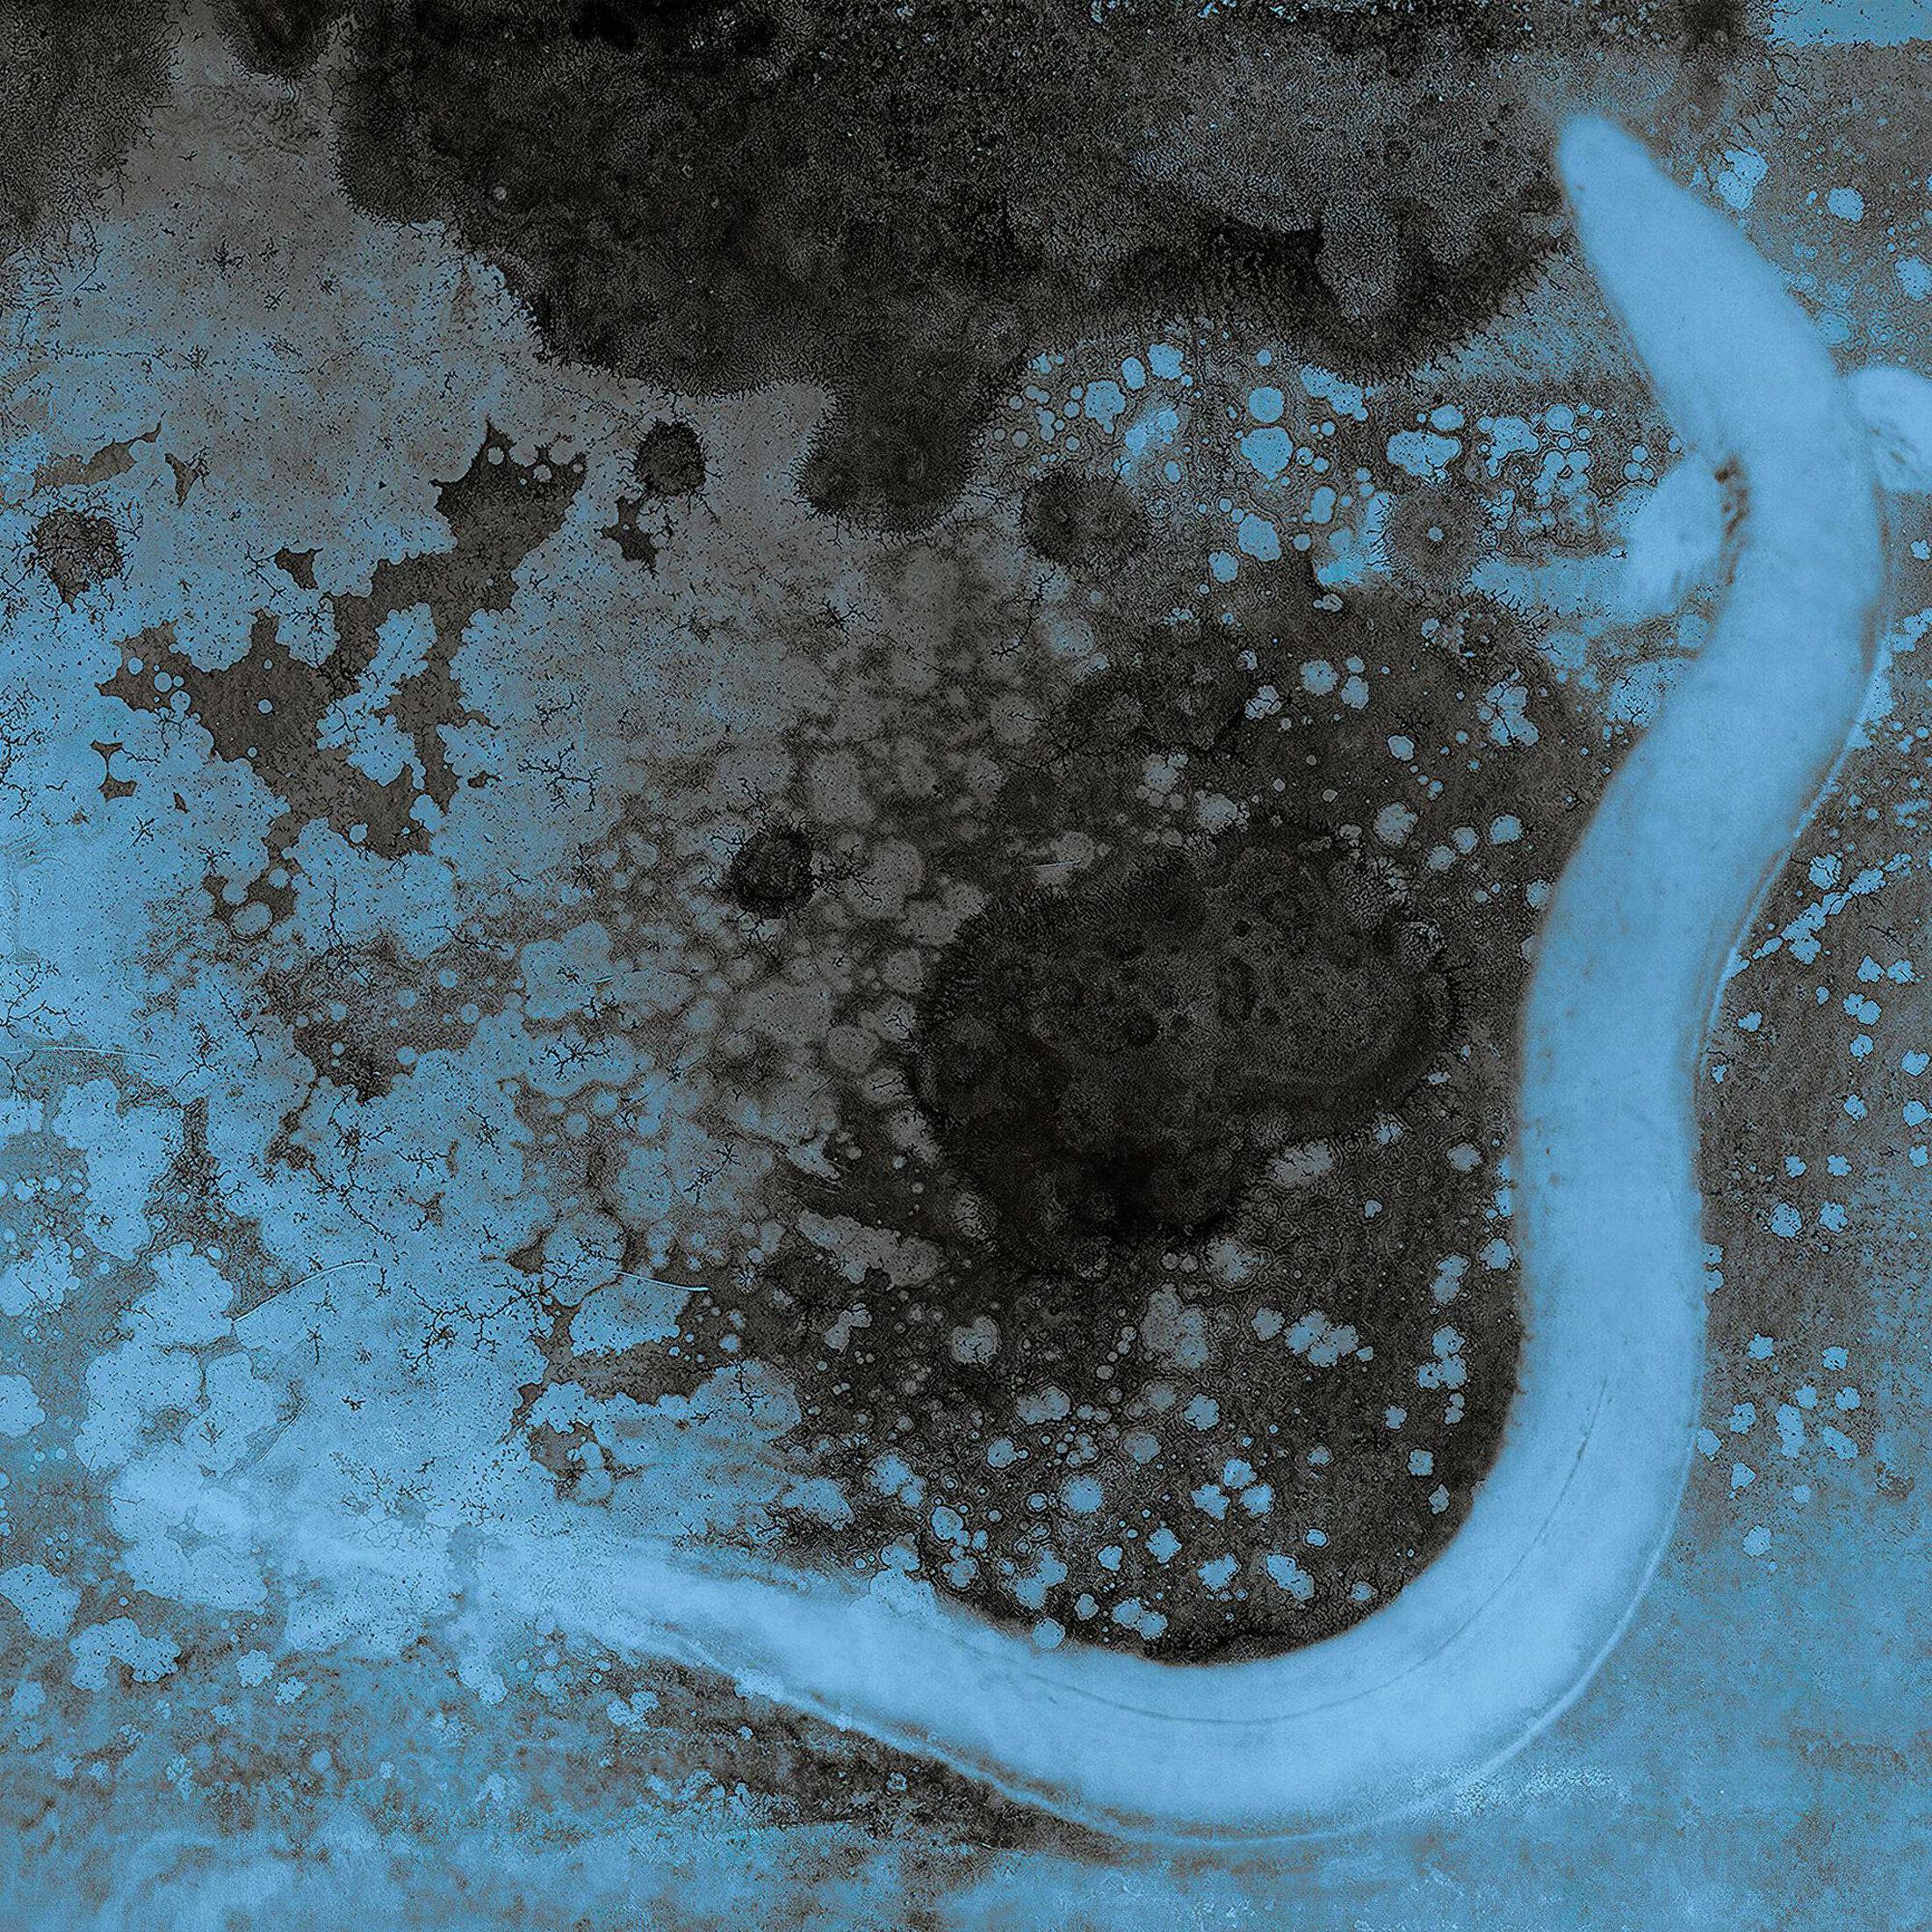 Eel seen from above in blue water.